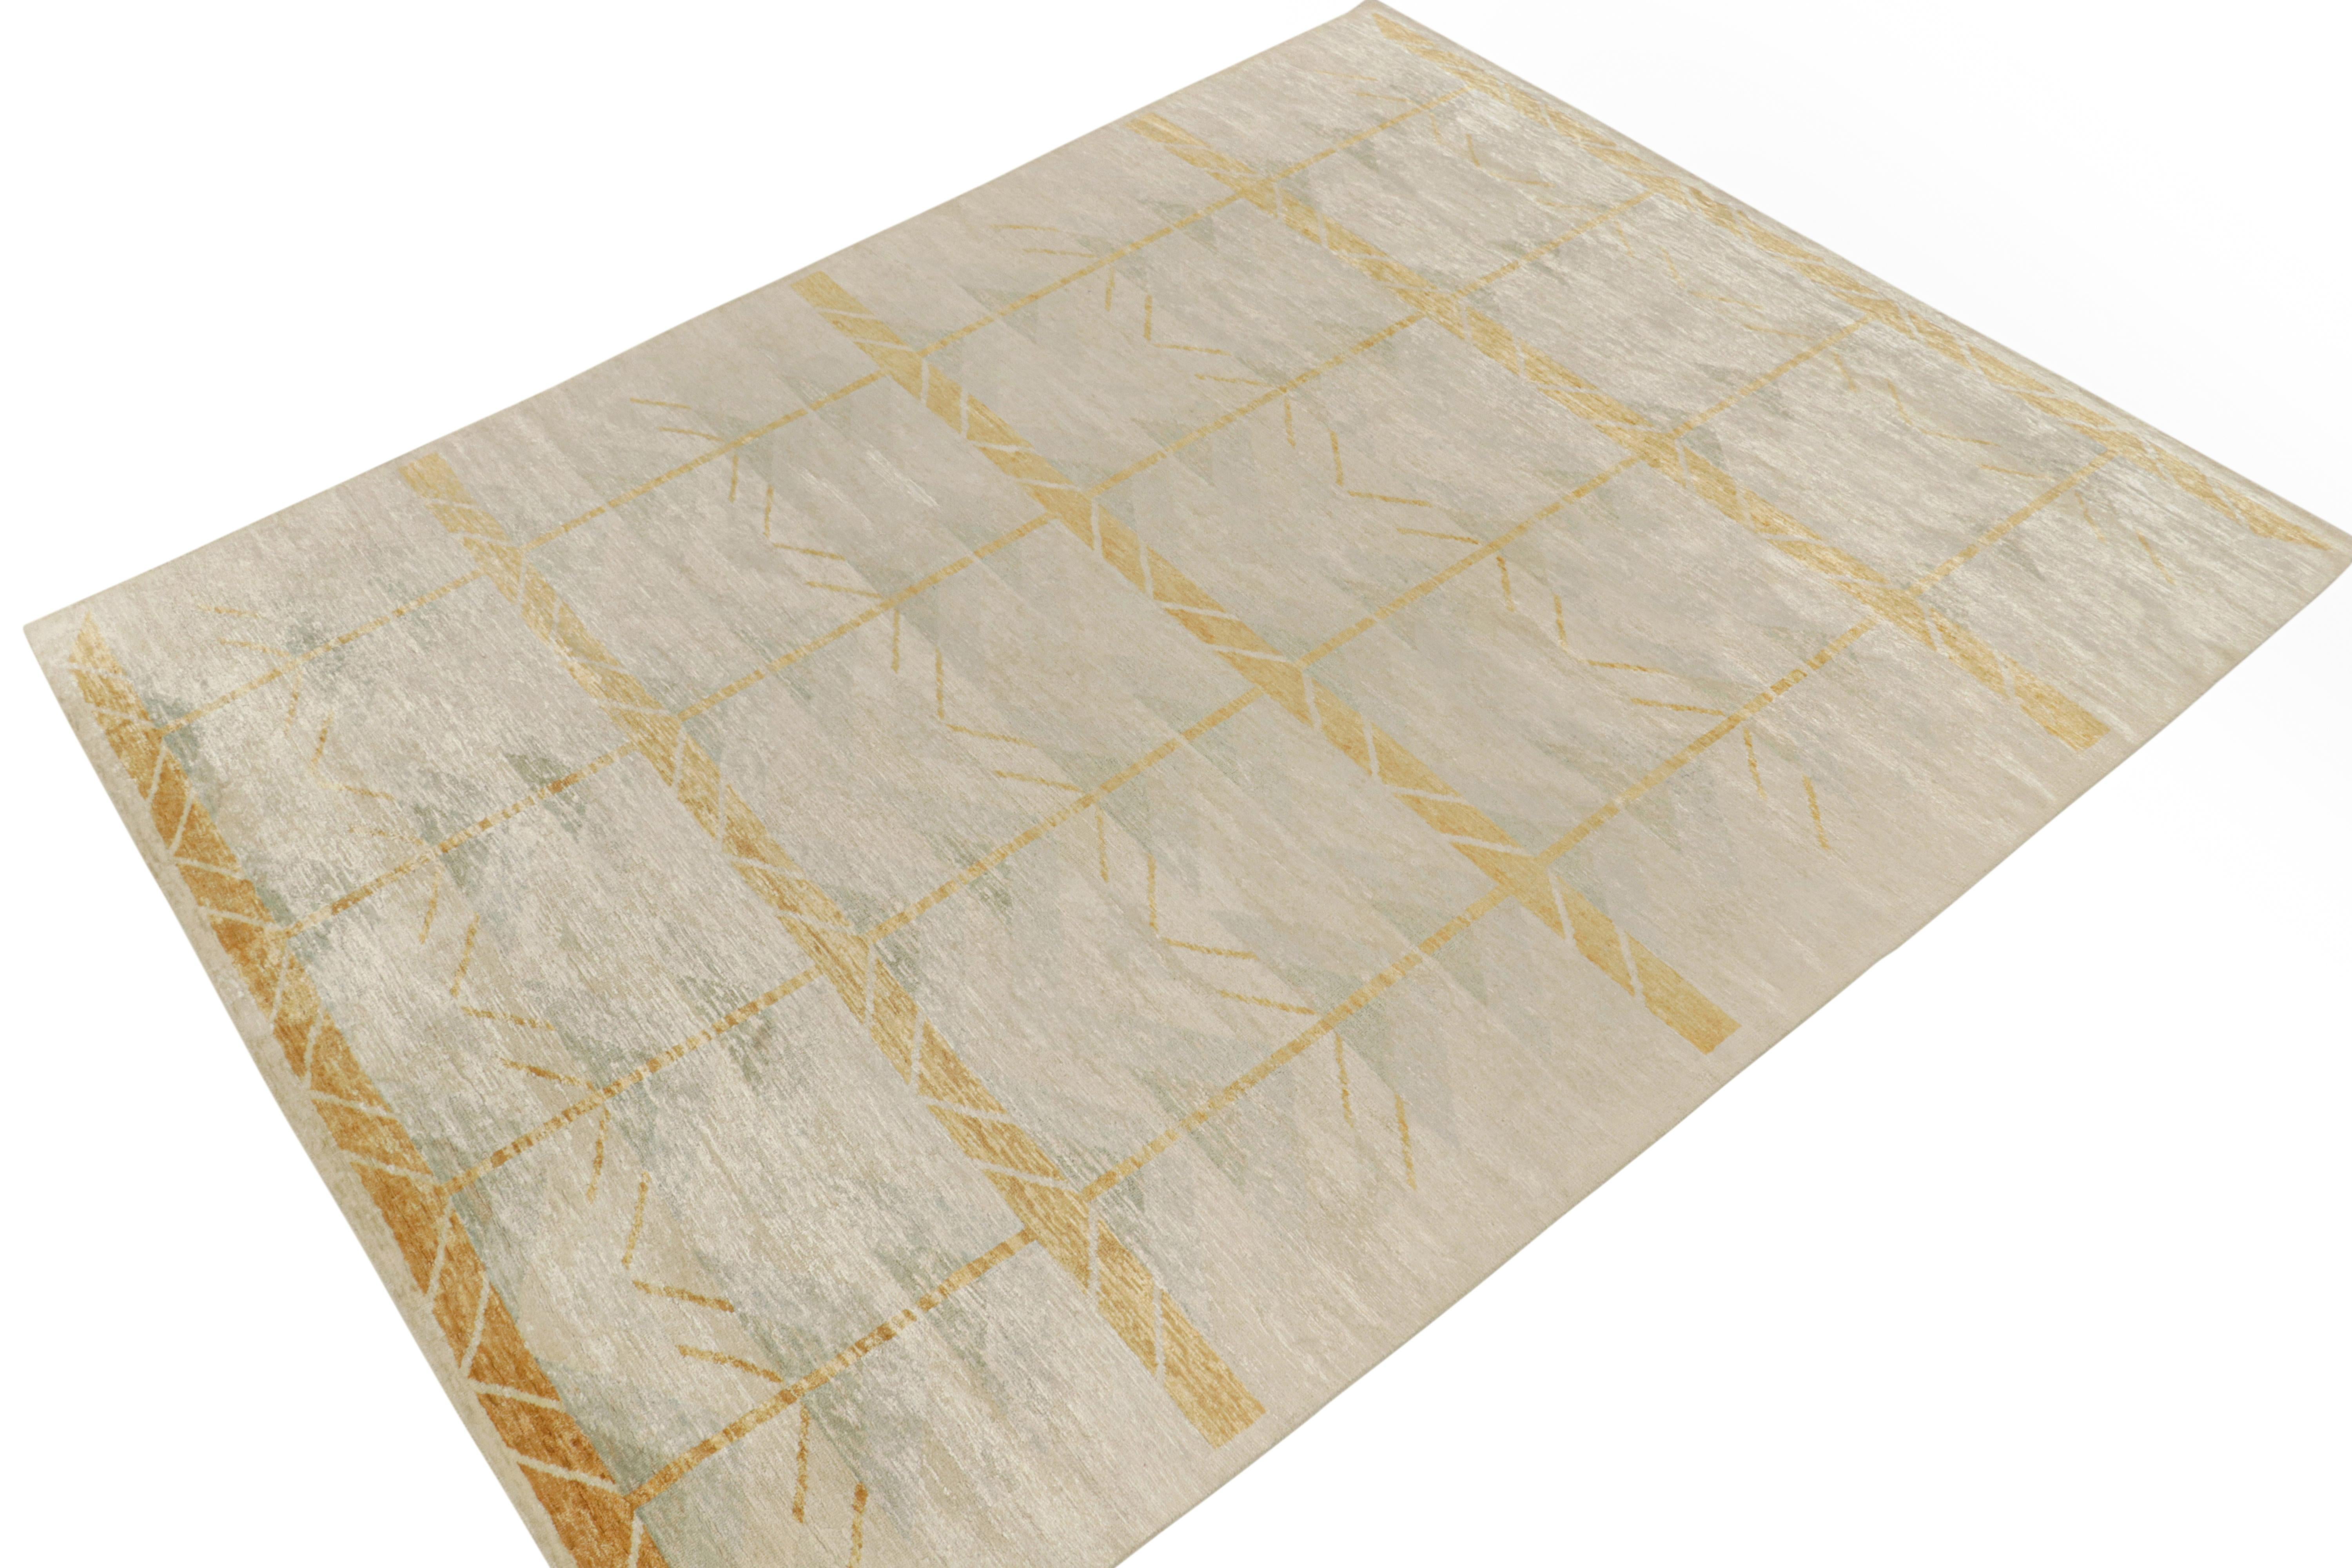 Hand-knotted in silk, from Rug & Kilim’s acclaimed Scandinavian rug collection reimagining the celebrated Mid-Century Modern style. 

This piece enjoys an experimental take on the Swedish Deco geometric pattern in luscious gray, blue and gold with